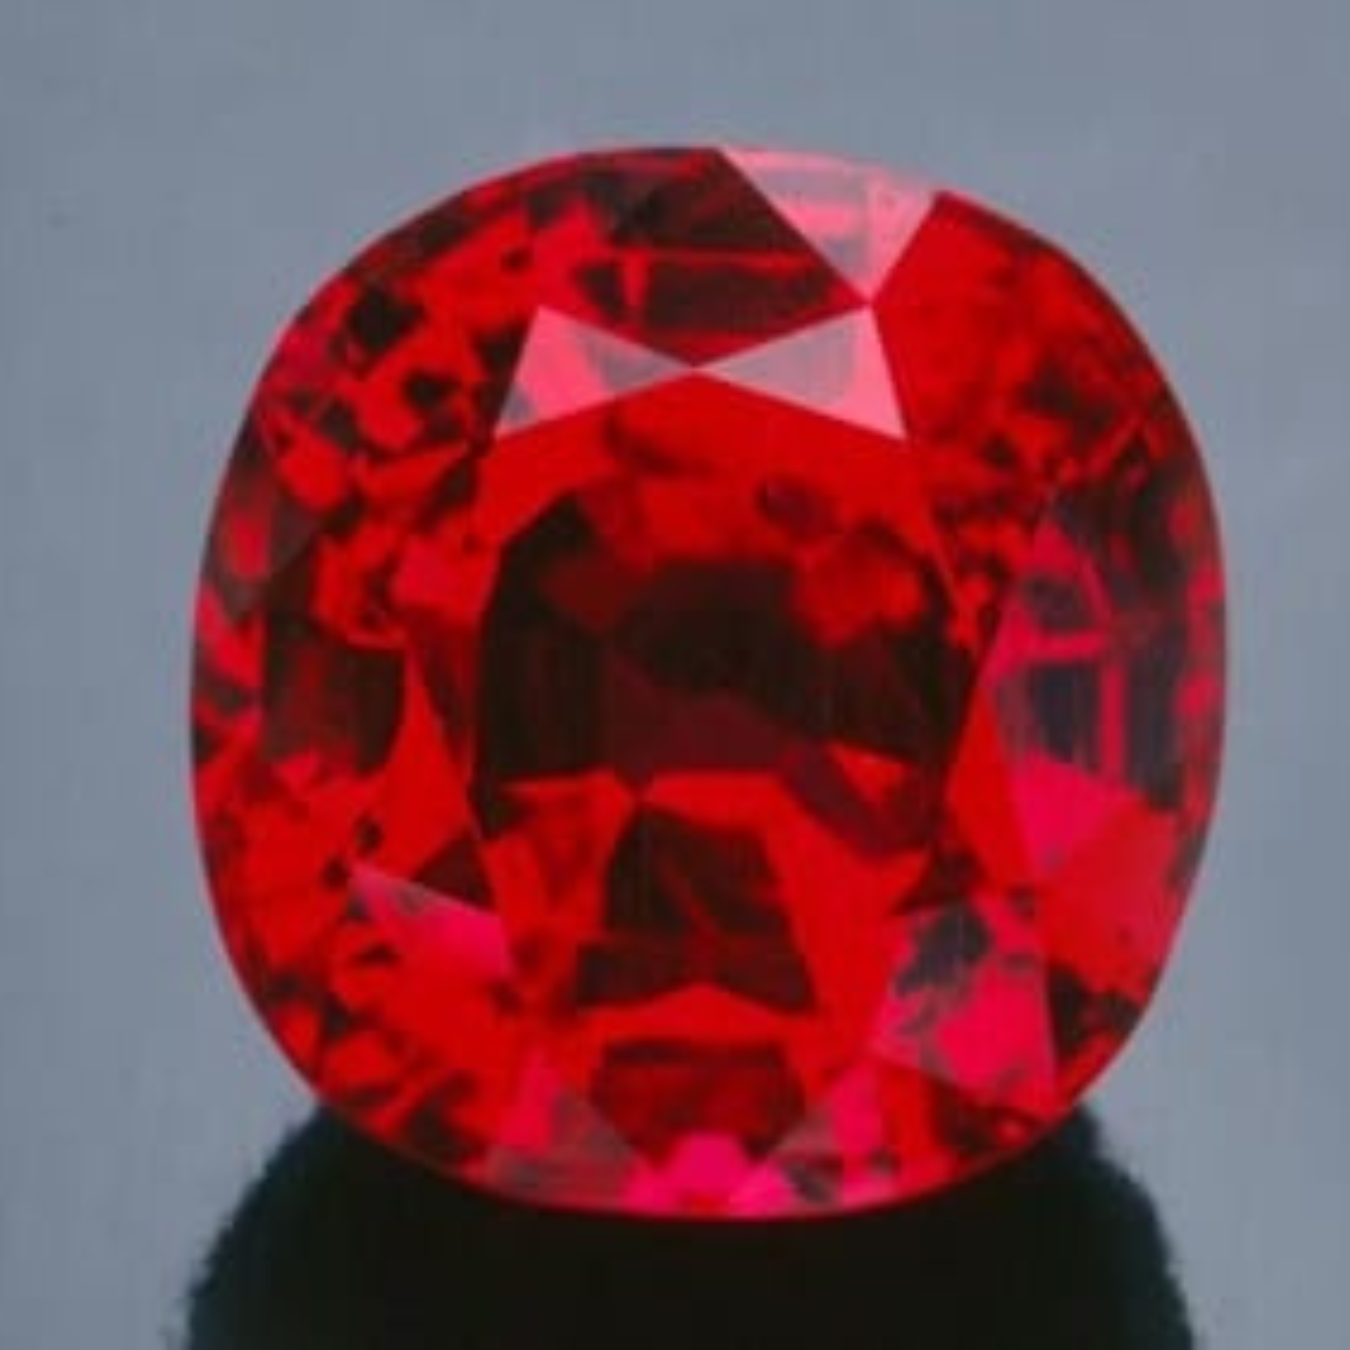 All you need to know about rubies